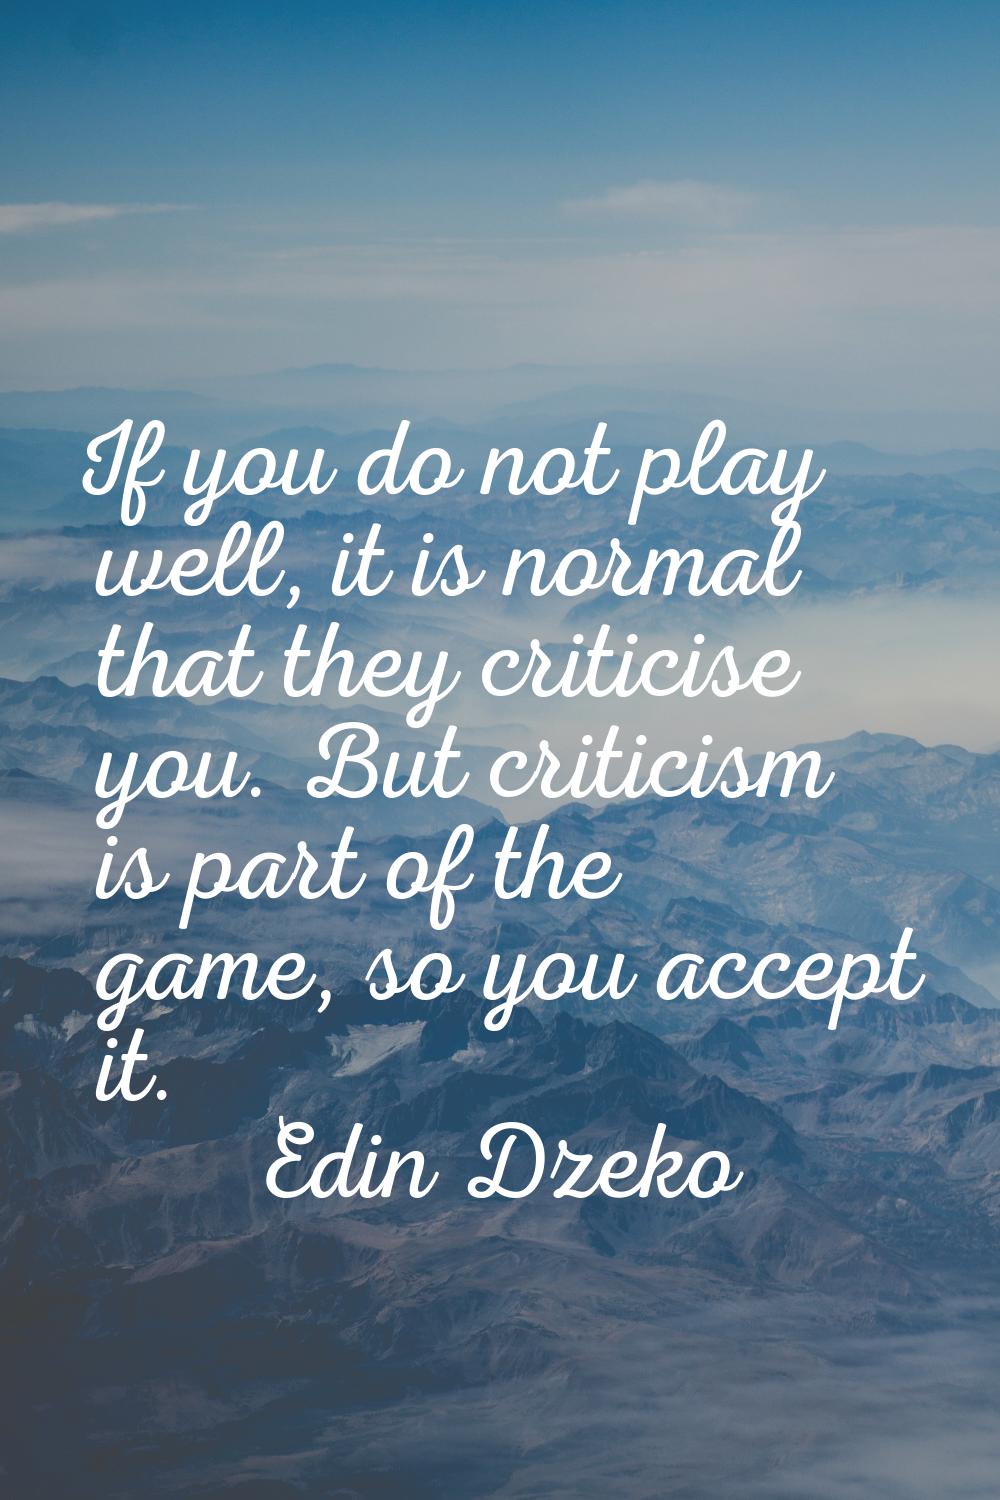 If you do not play well, it is normal that they criticise you. But criticism is part of the game, s